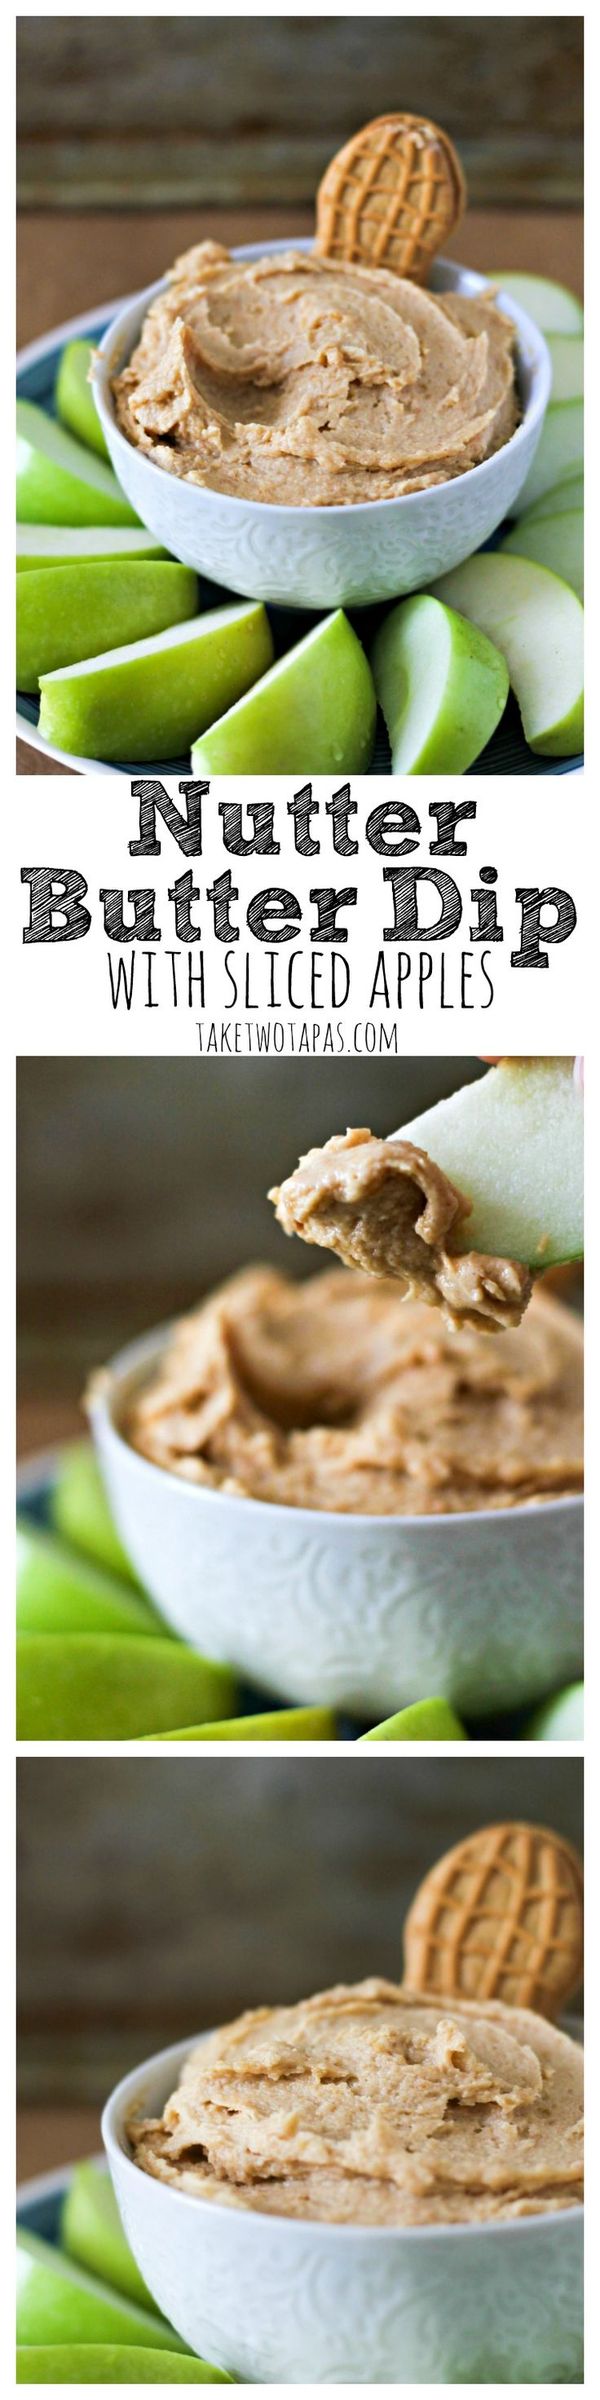 Nutter Butter Dip with Apples